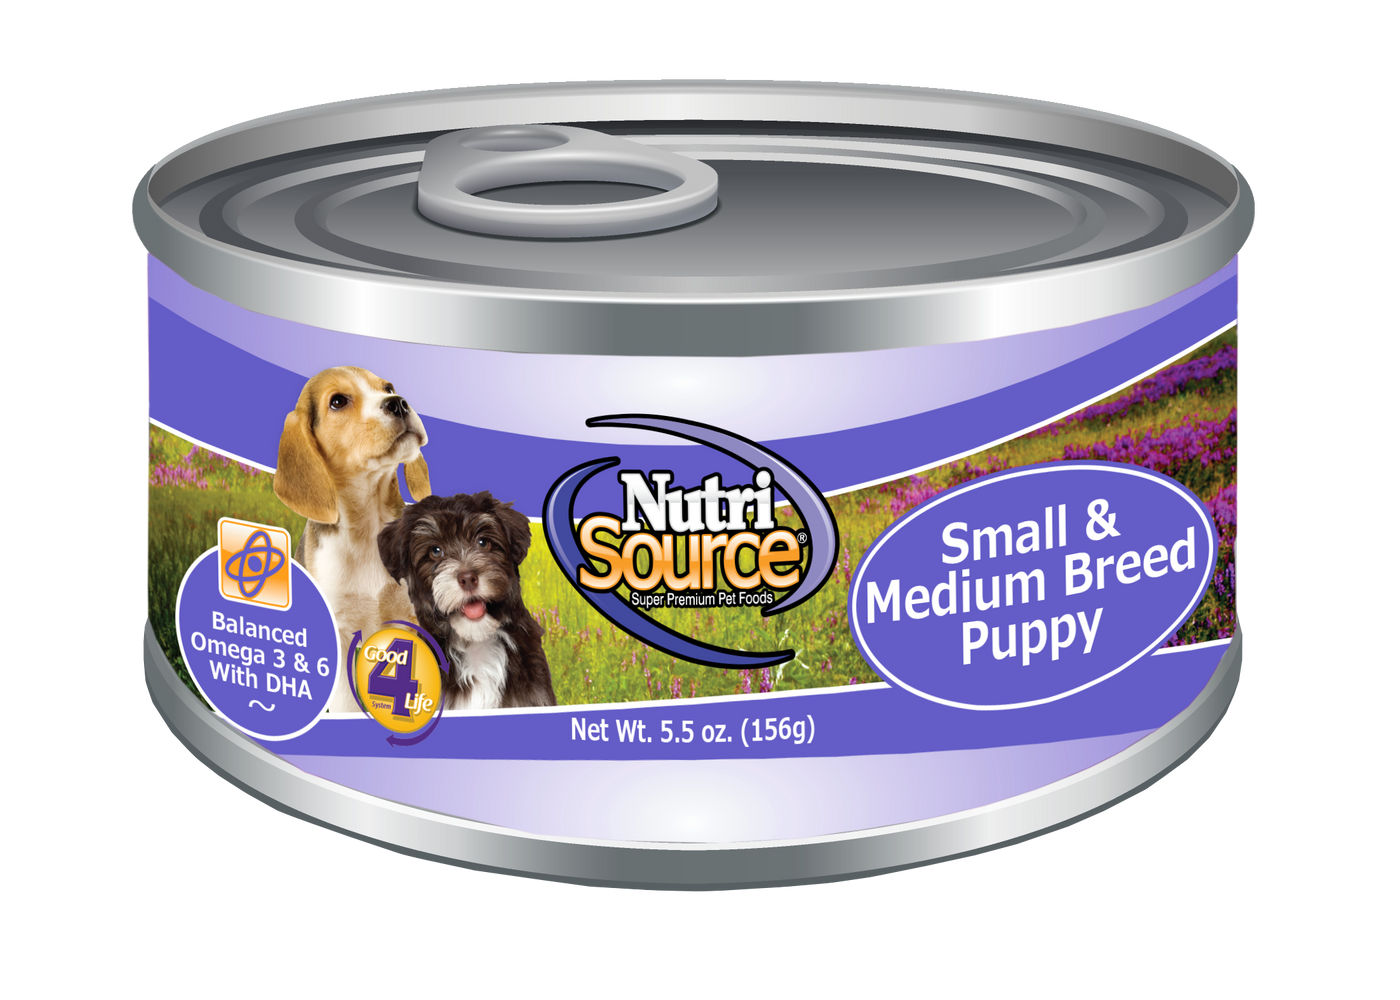 Nutrisource Small & Medium Breed Puppy Chicken and Rice Canned Dog Food 5.5z